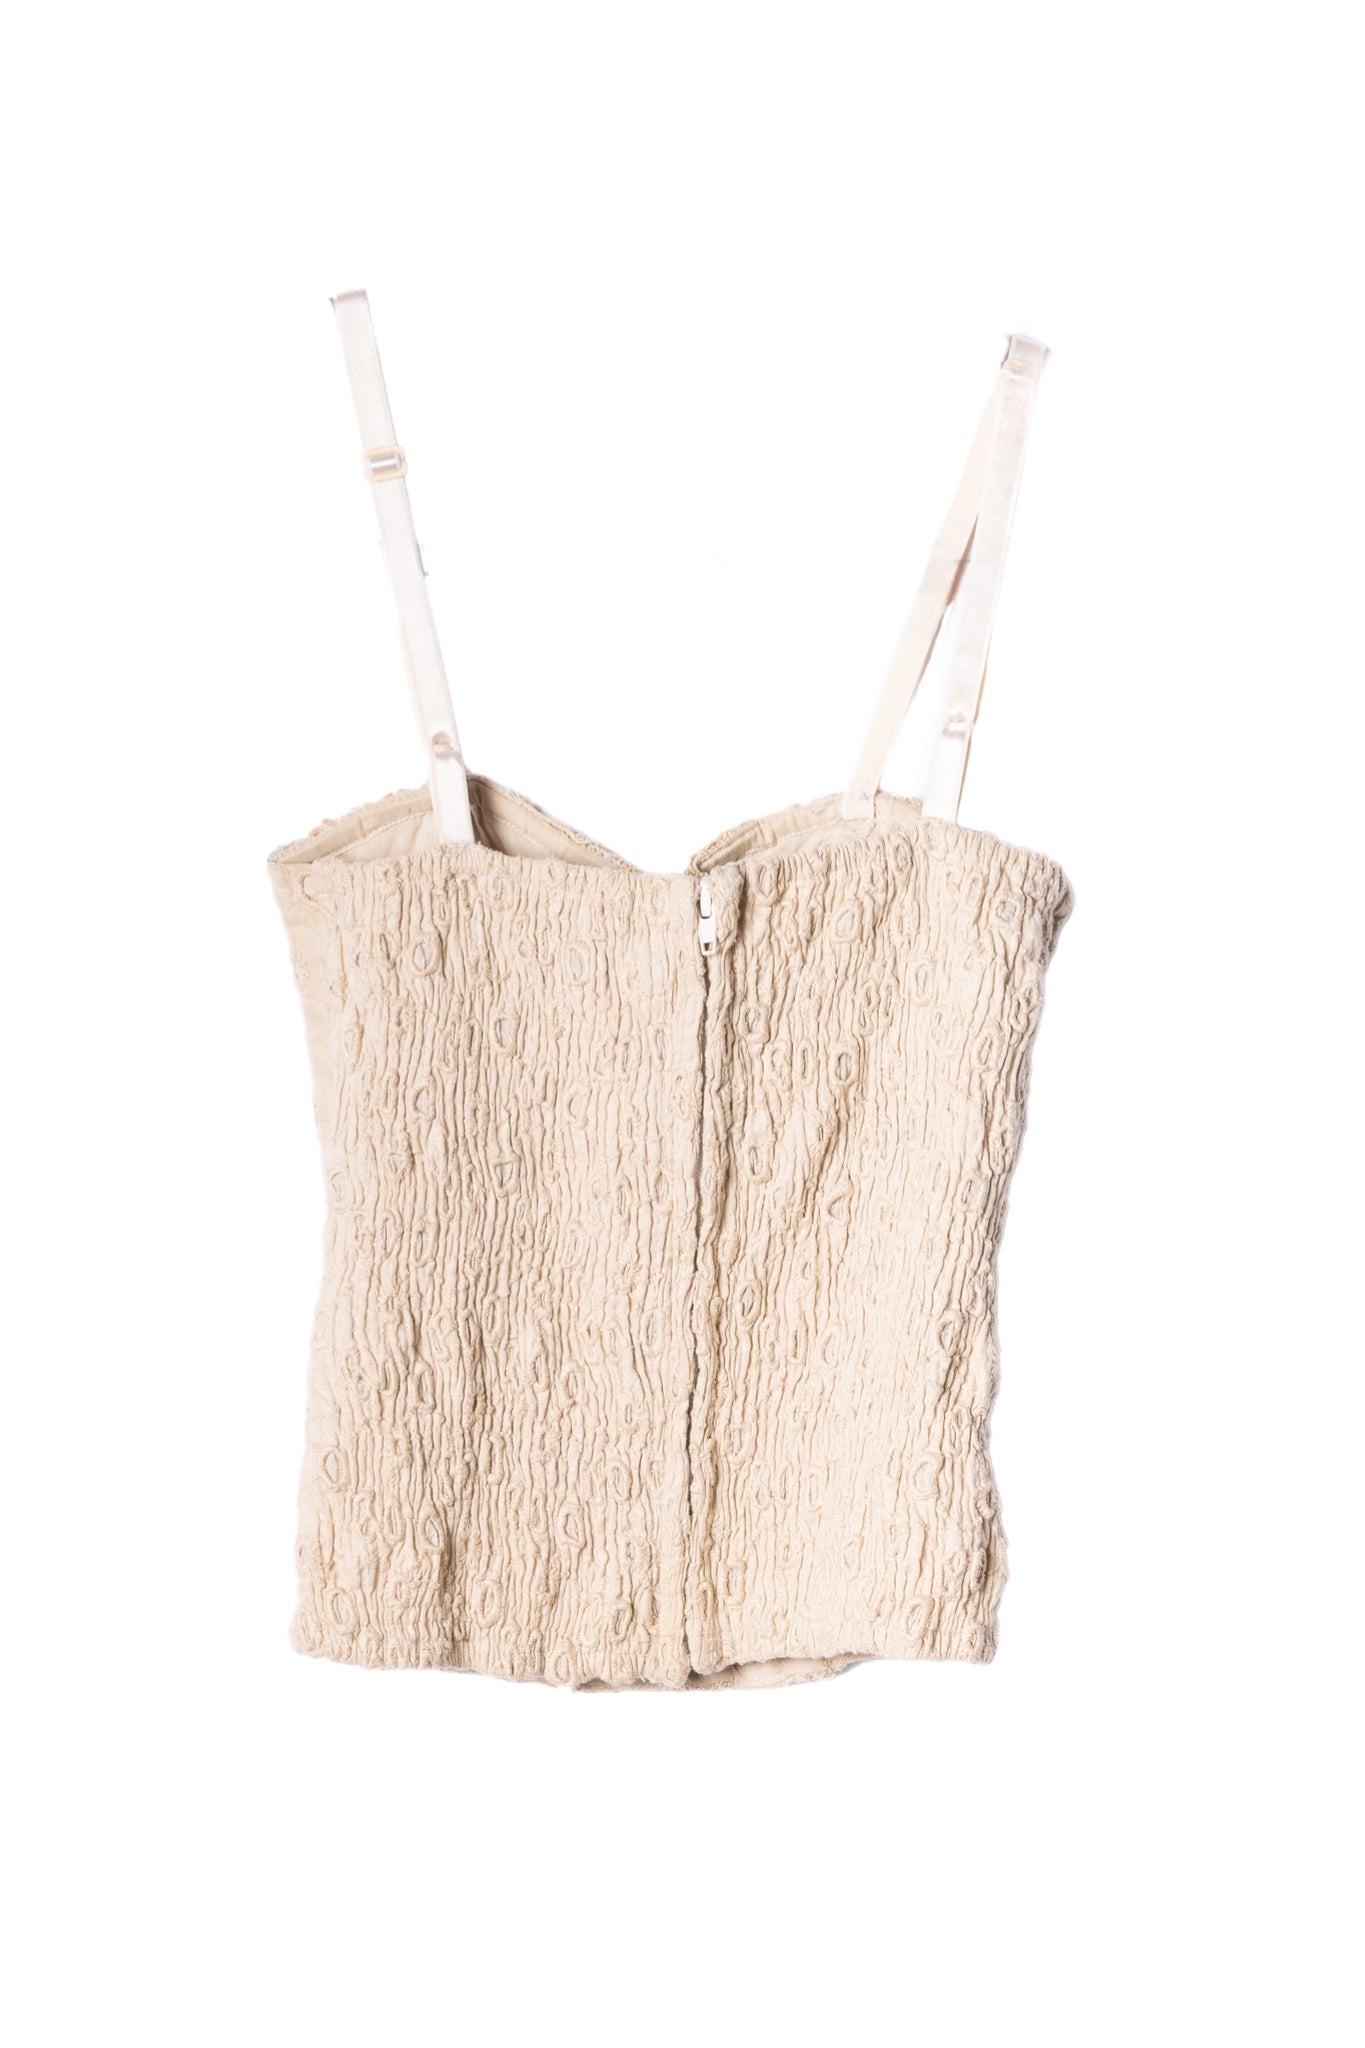  Arden B Eyelet Corset Top - Nude color, size S. Cotton and eyelet material. Deadstock in very good condition.